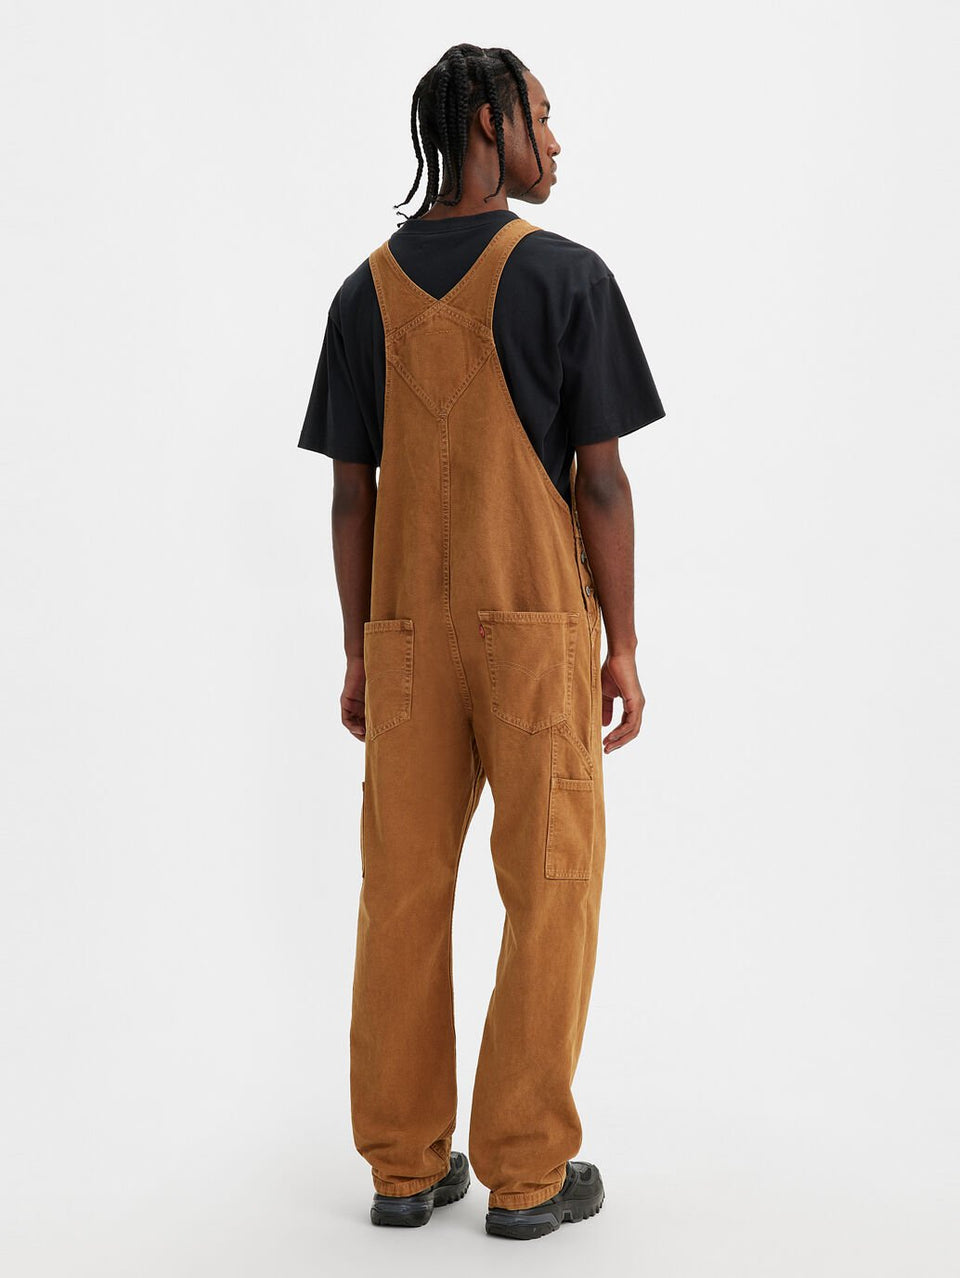 Levis Red Tab Overalls Dark Ginger Canvas